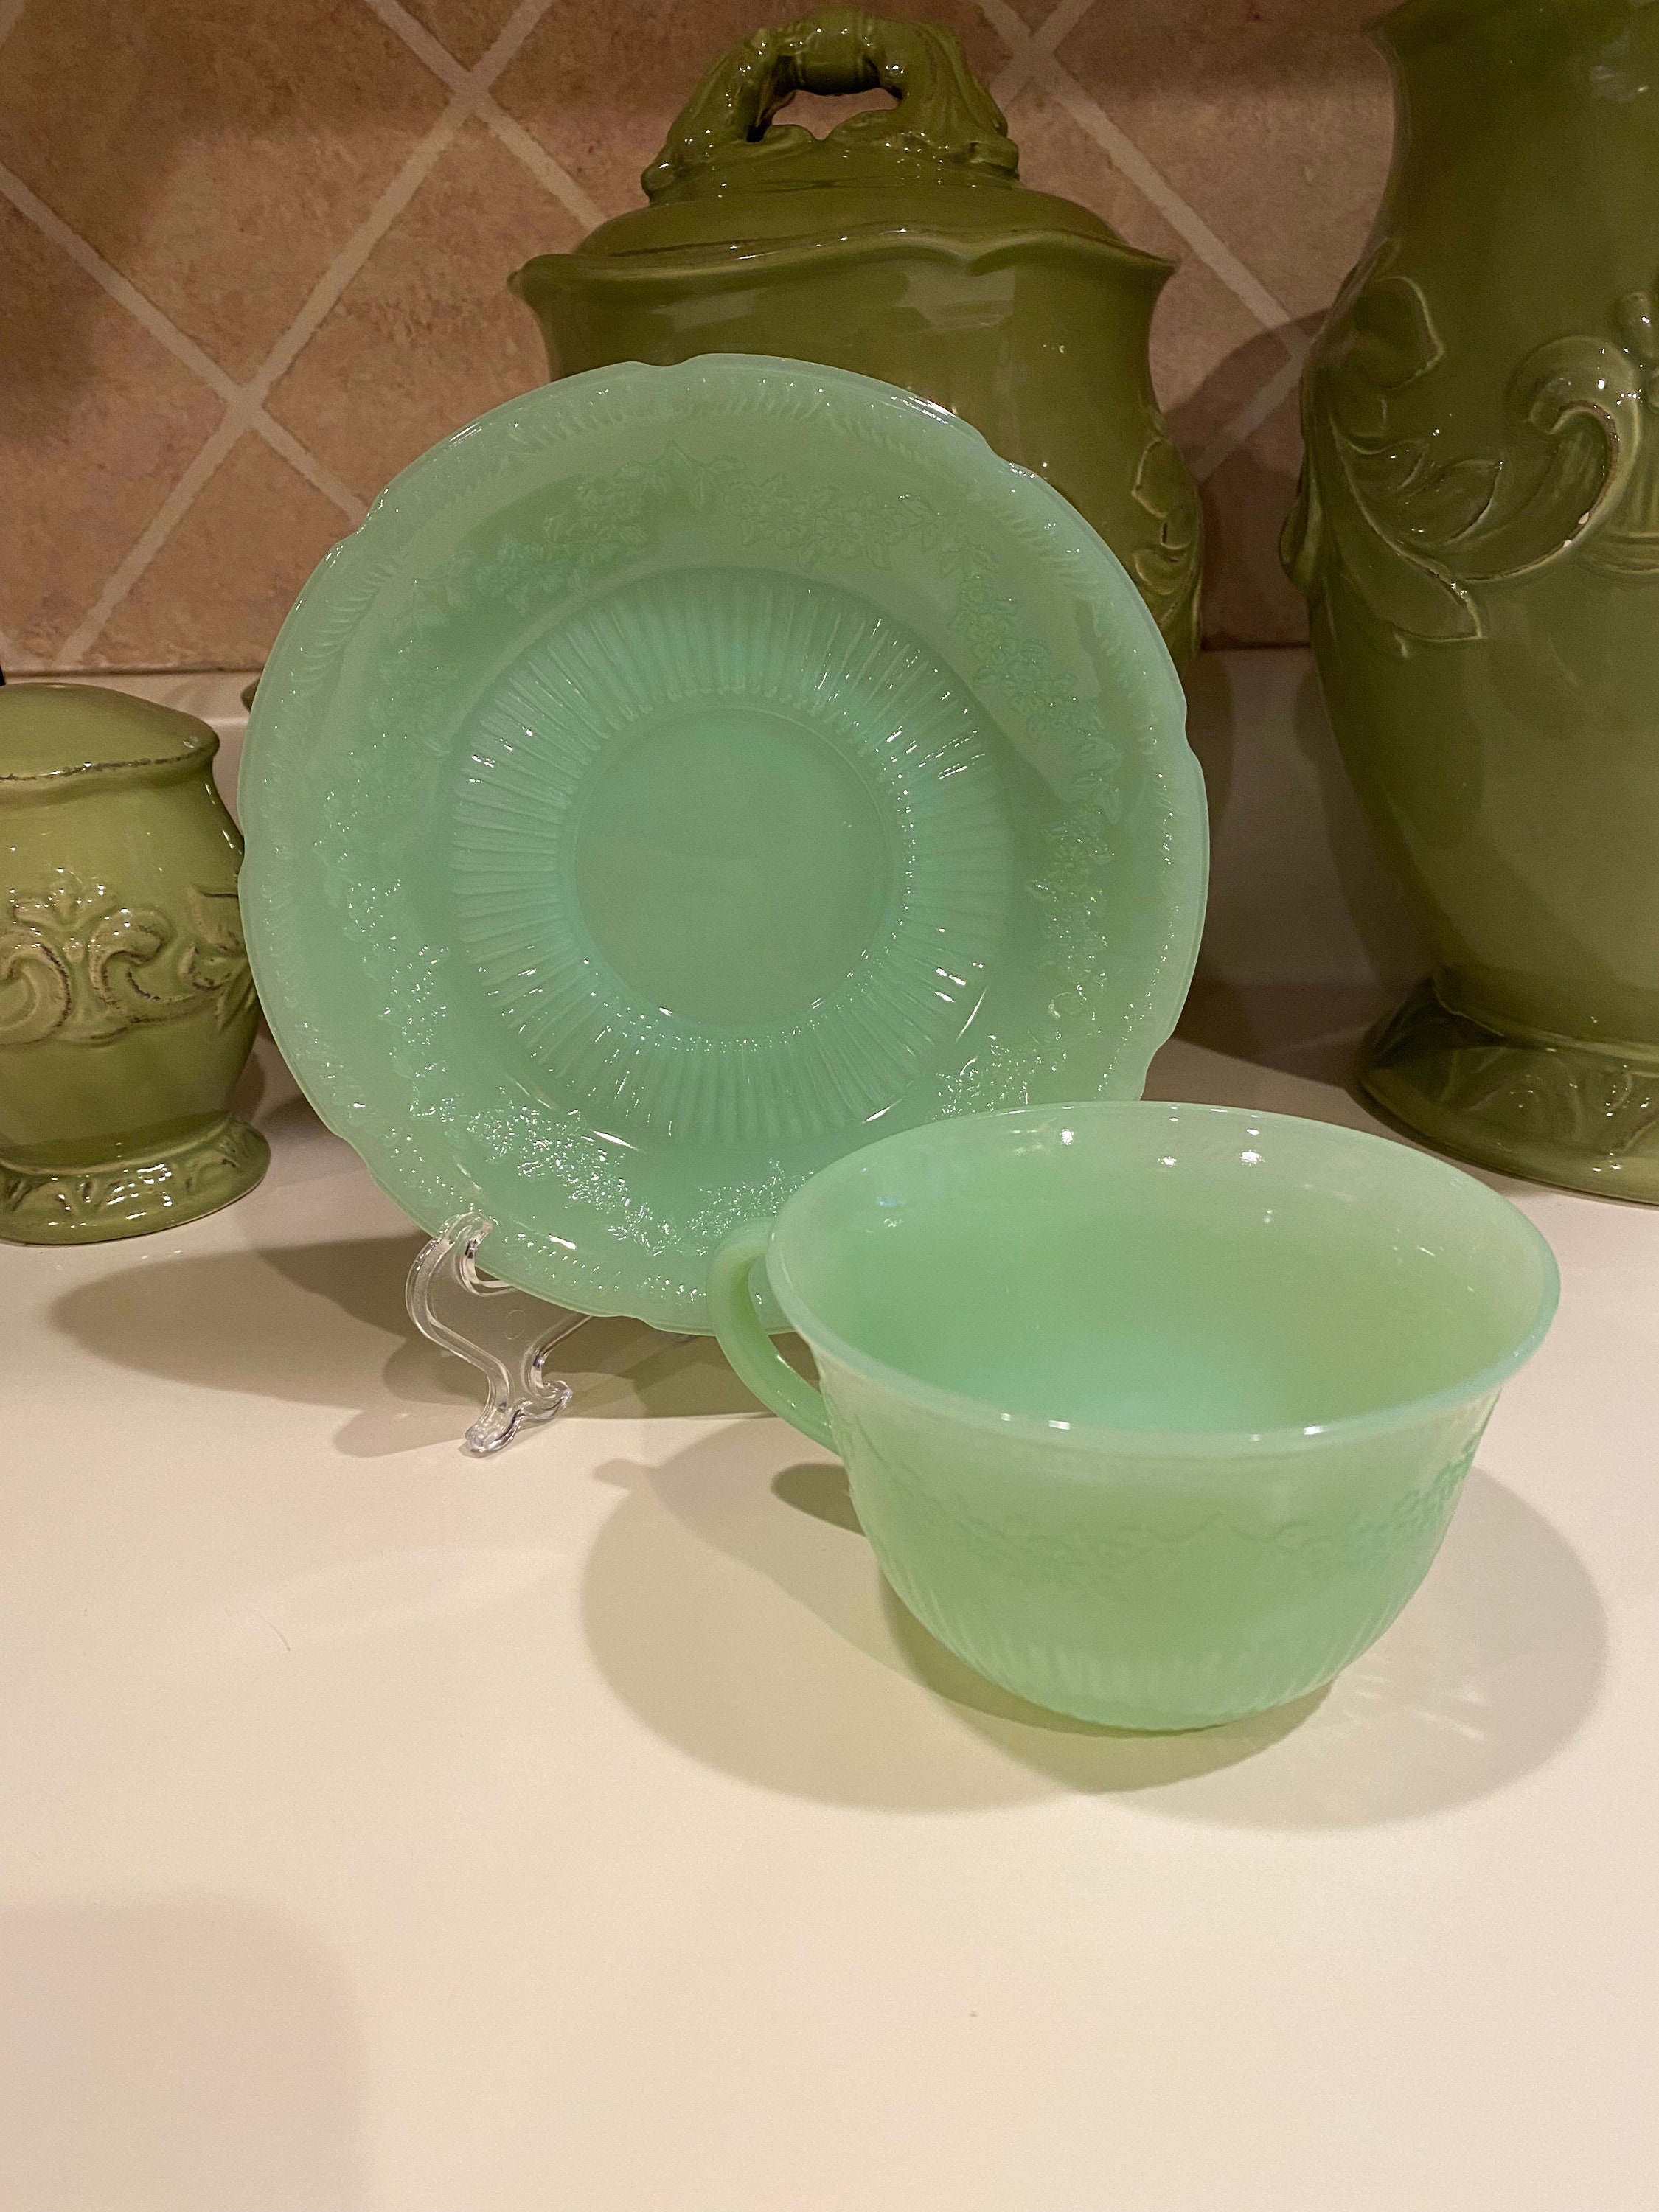 All of this Fire King Jadeite glassware was just handed down to me from my  grandma. I am over the moon right now. : r/vintage